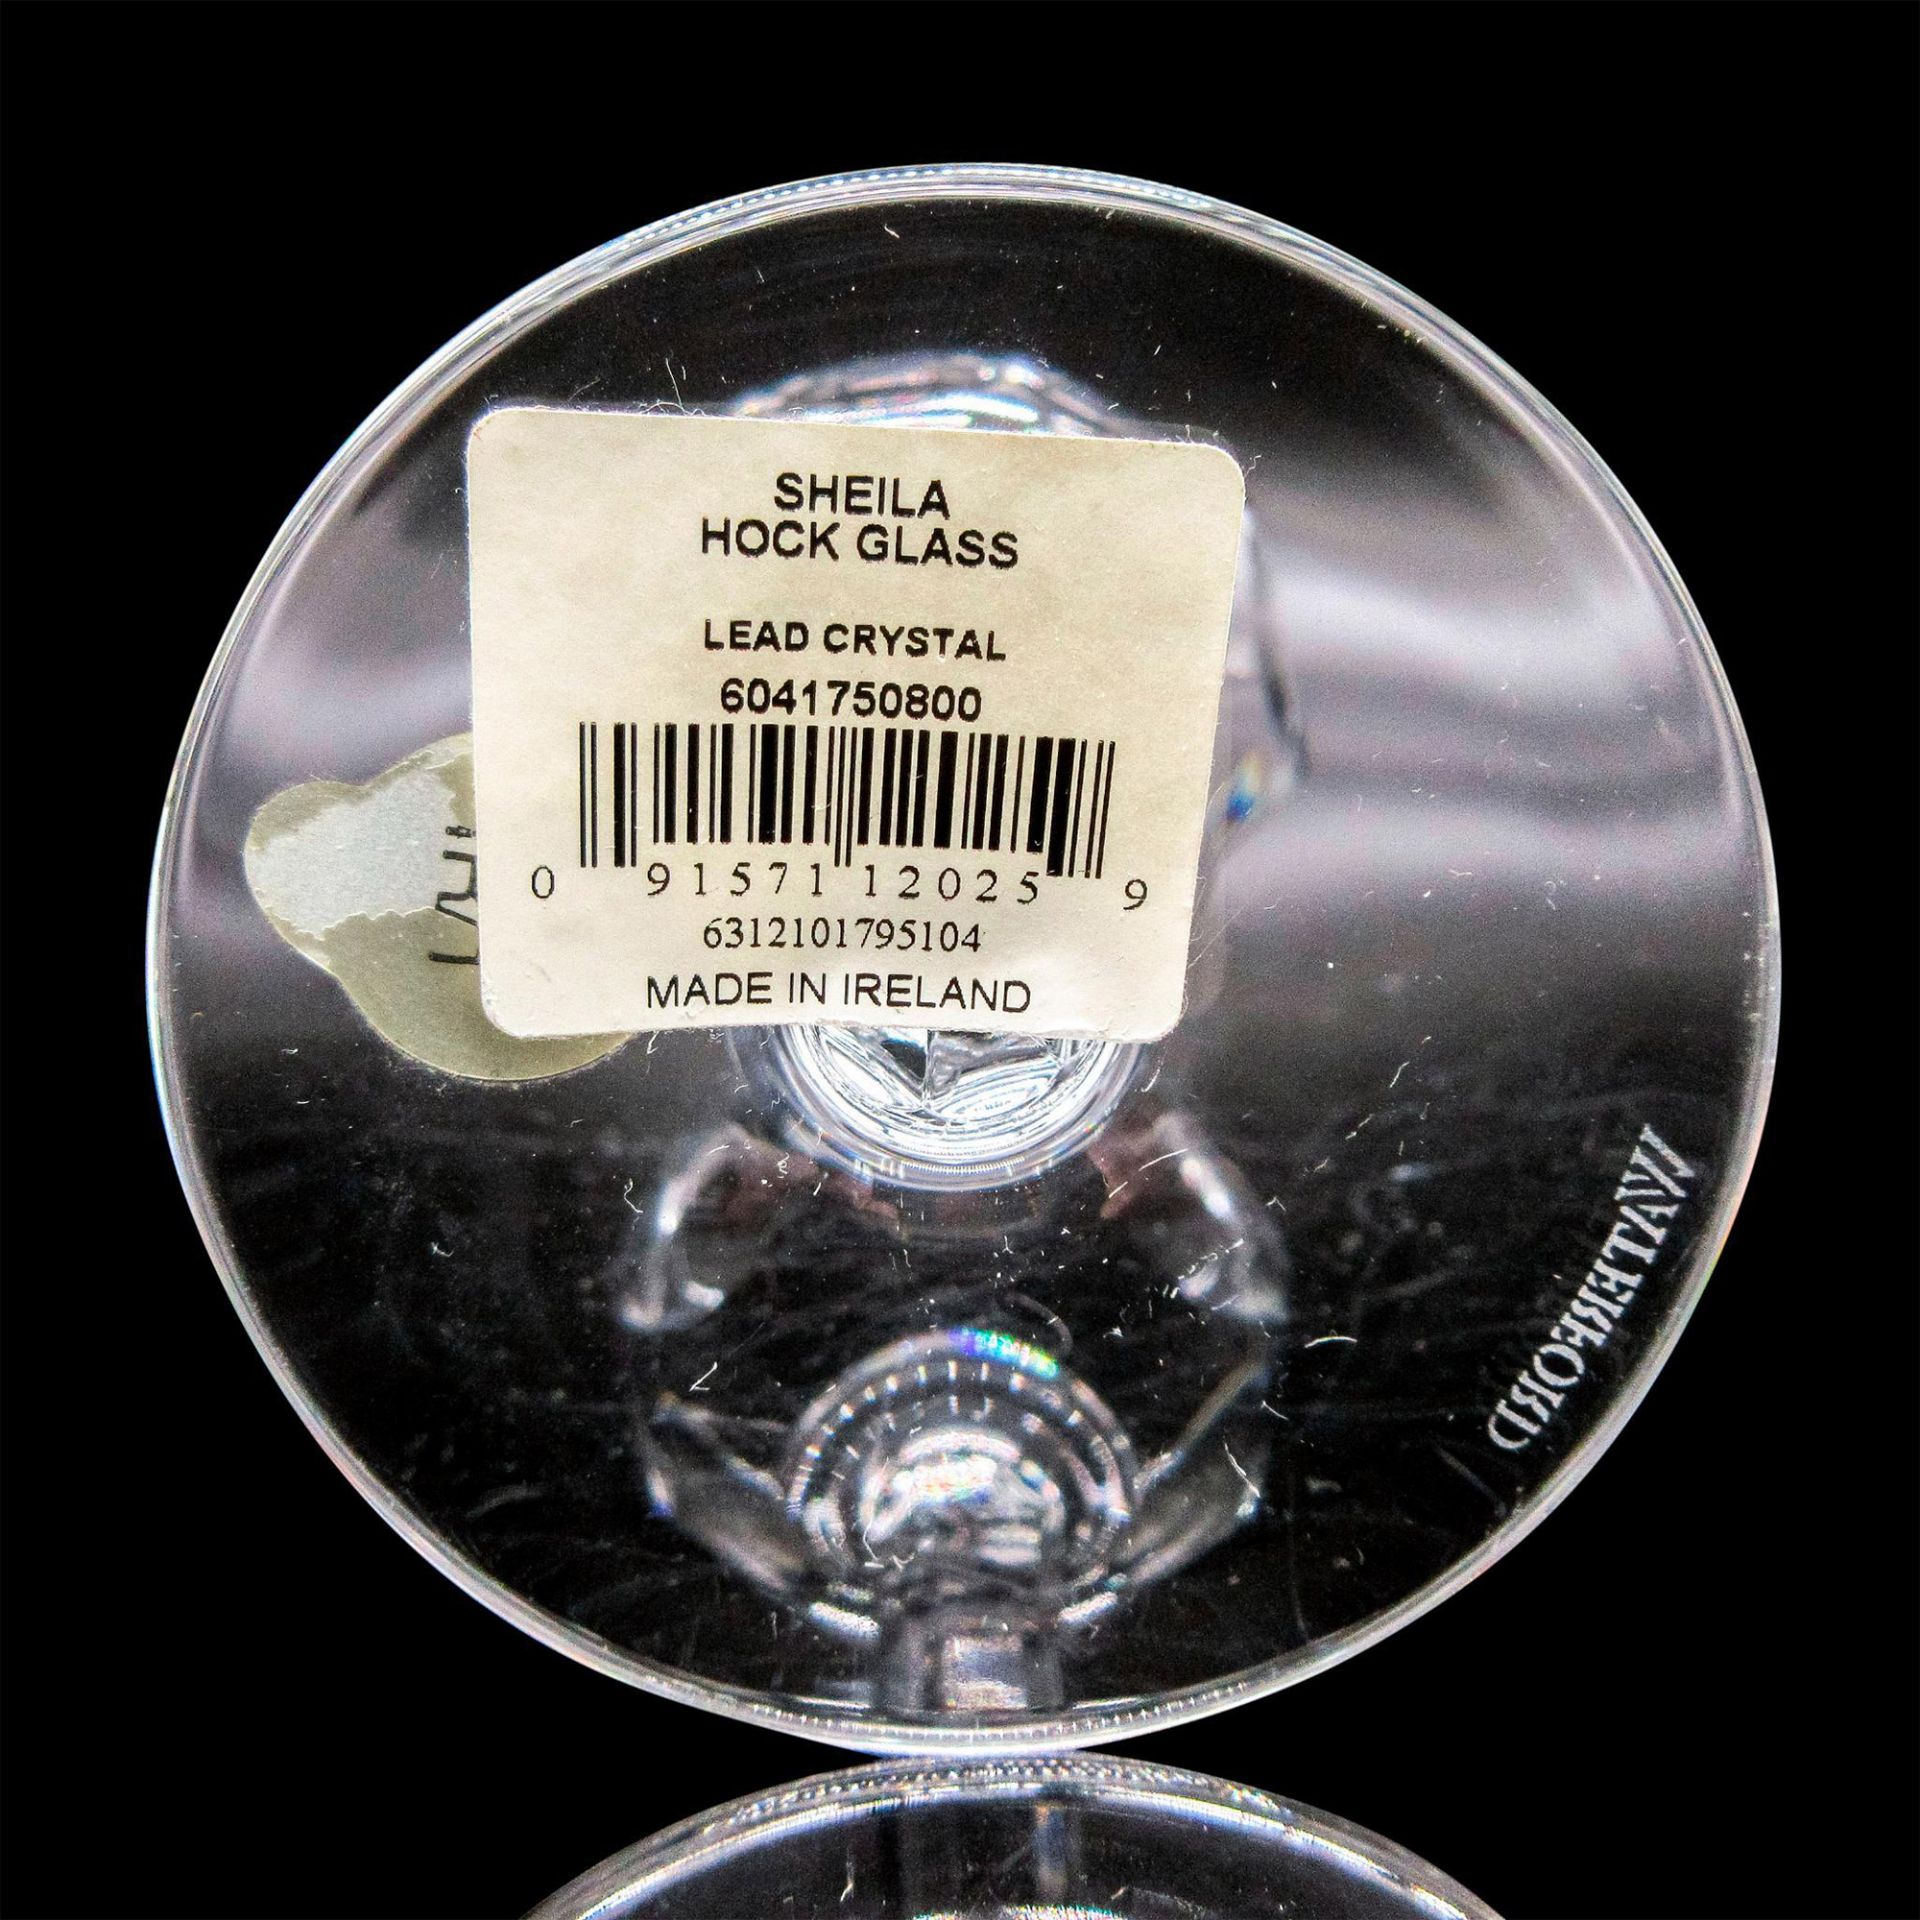 2pc Waterford Crystal Hock Wine Glasses, Sheila - Image 7 of 9